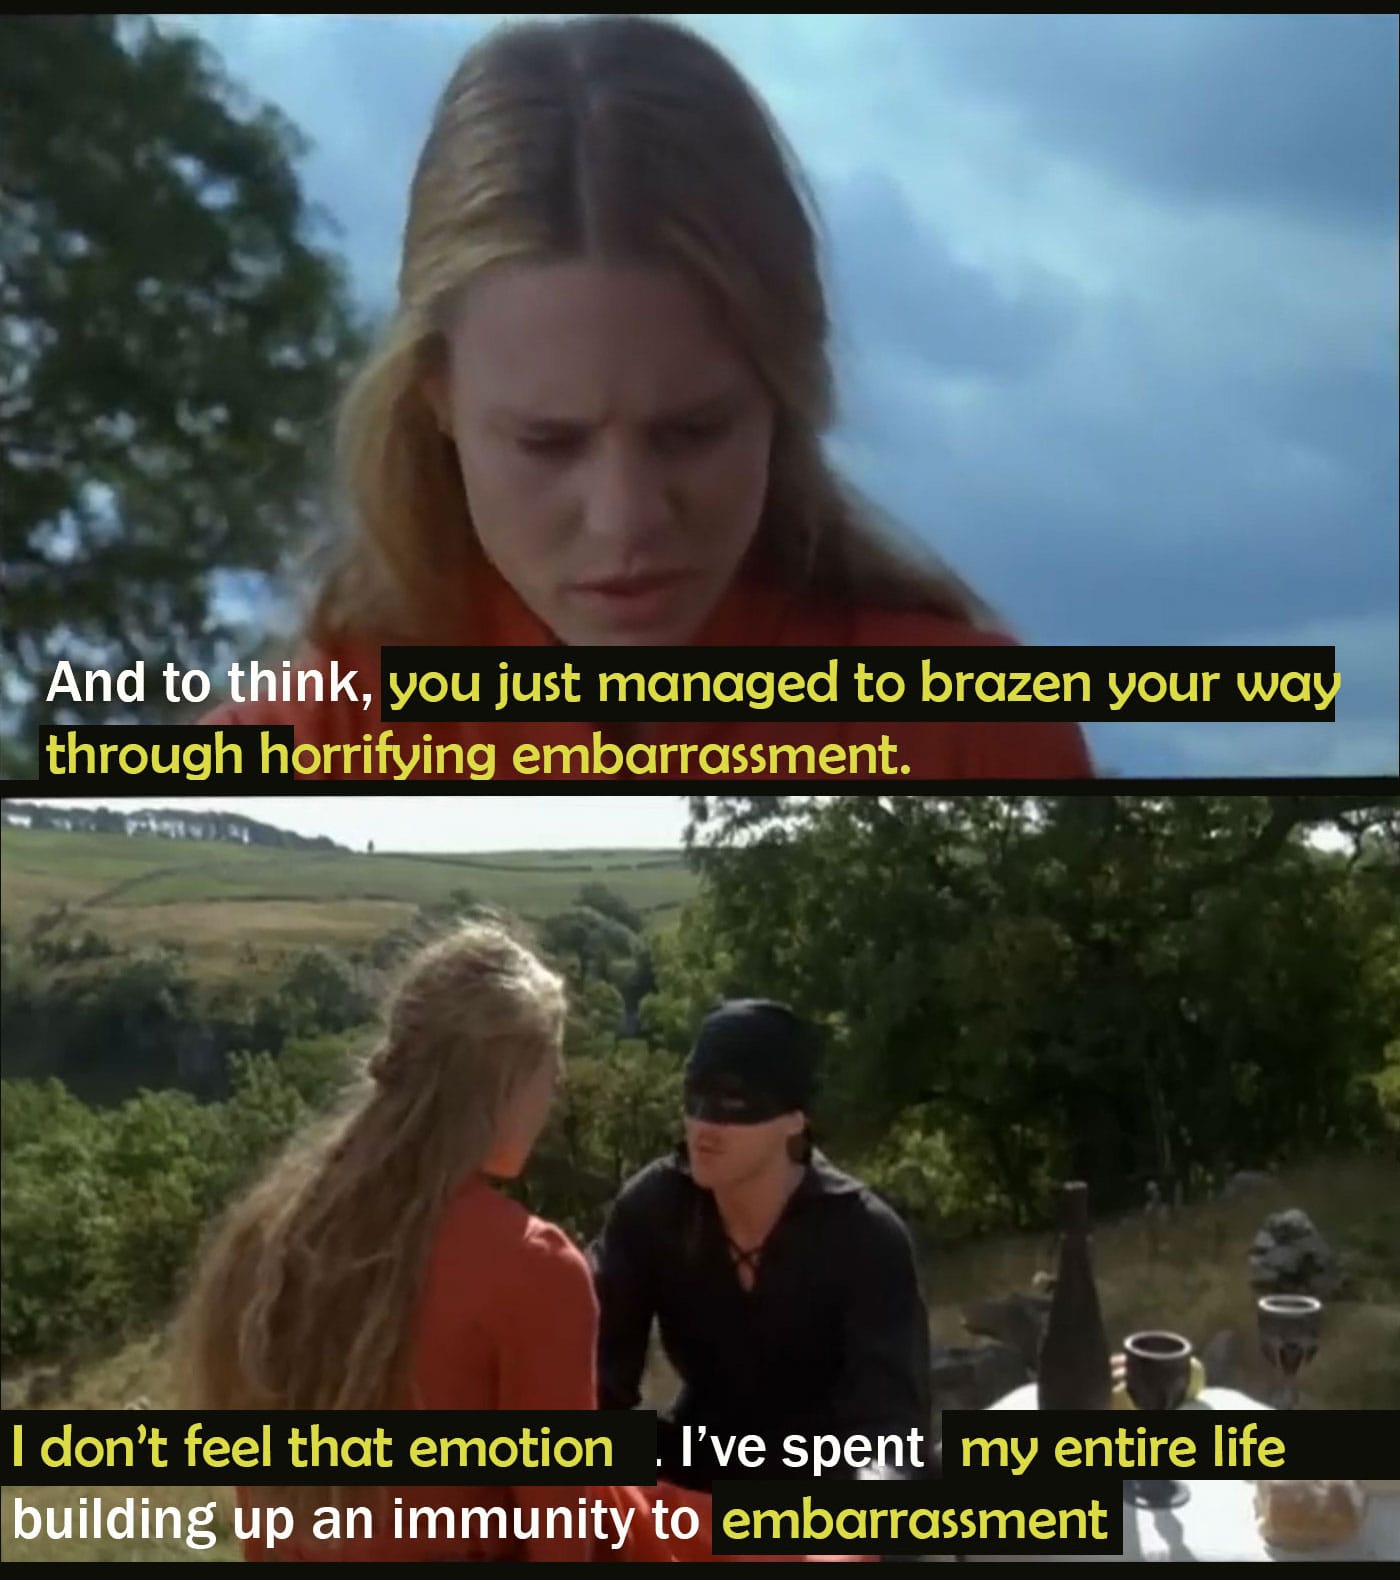 Another meme! This time of a scene from The Princess Bride in which Westley explains that he's spent years building up an immunity to iocane powder on this version he's spend "my entire life building up an immunity to embarrassment".